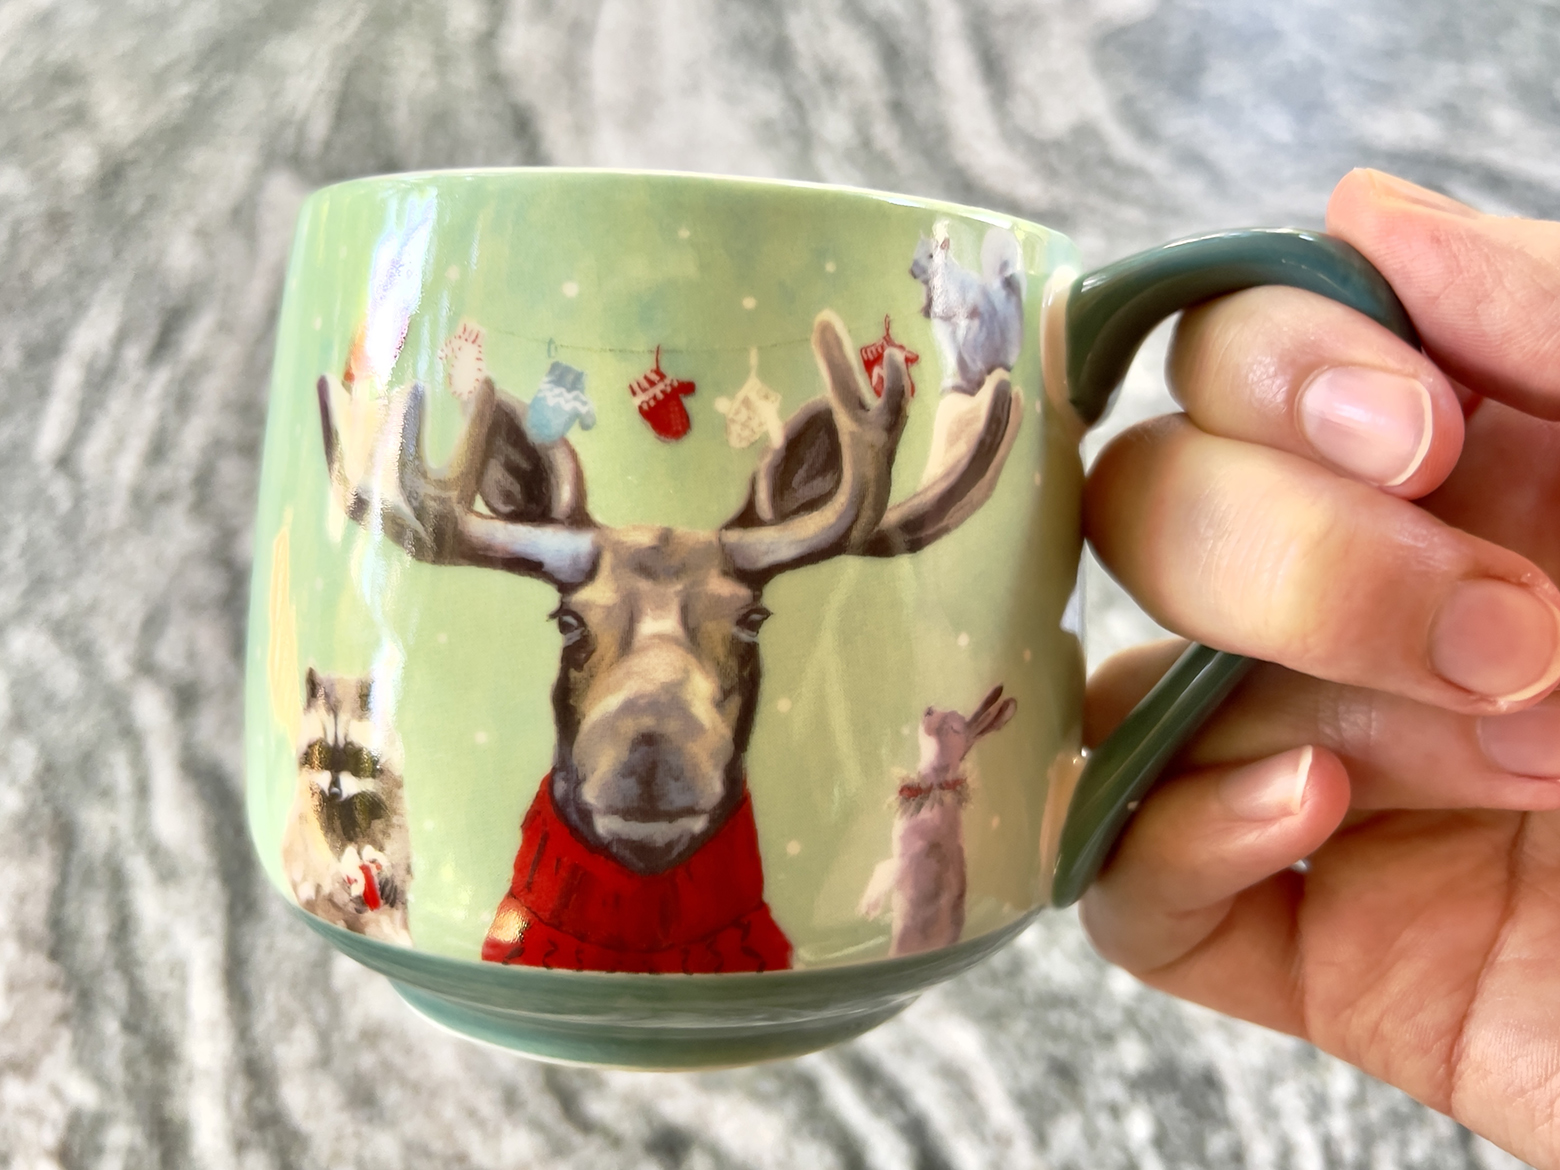 Christmas coffee mug is held above a countertop. The mug has a moose with a cardinal on the left antler and a squirrel on the right, each holding the end of a string with mittens hanging from it. A raccoon and a bunny flank the moose on the bottom.